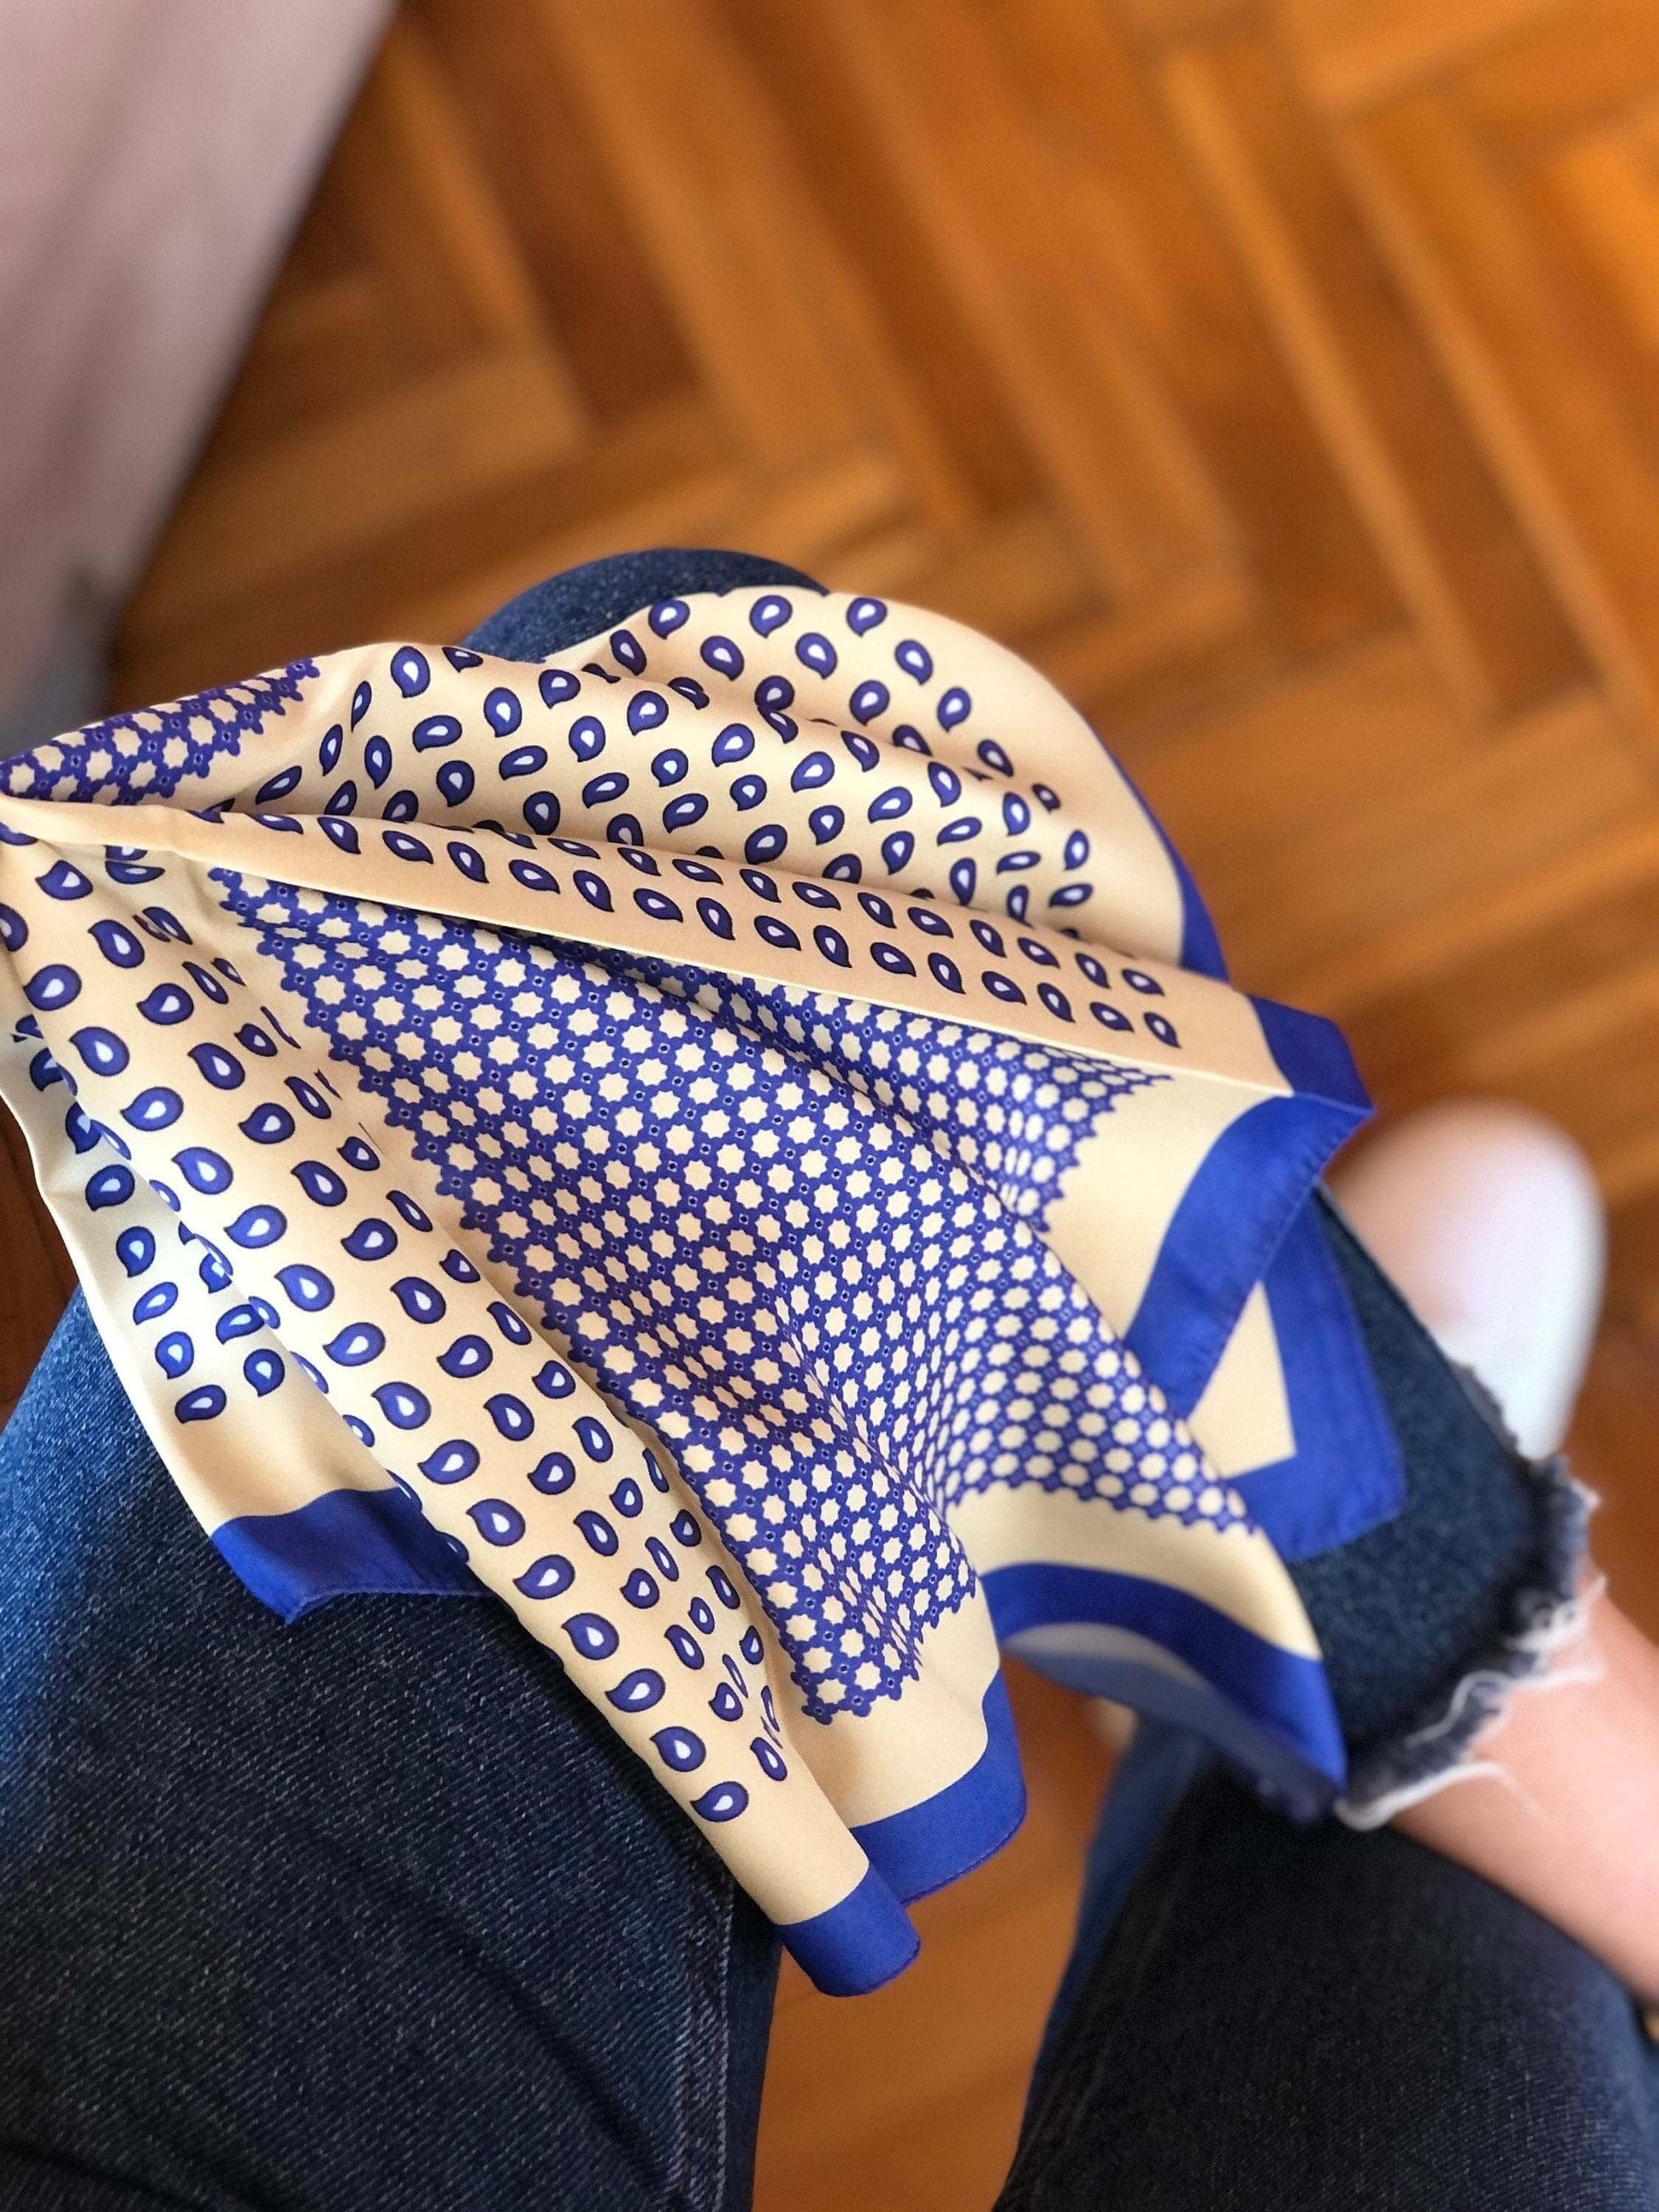 Add a pop of color to your everyday look with this navy blue and yellow satin scarf. The versatile design can be worn as a head scarf or neck scarf, making it the perfect accessory for any occasion.